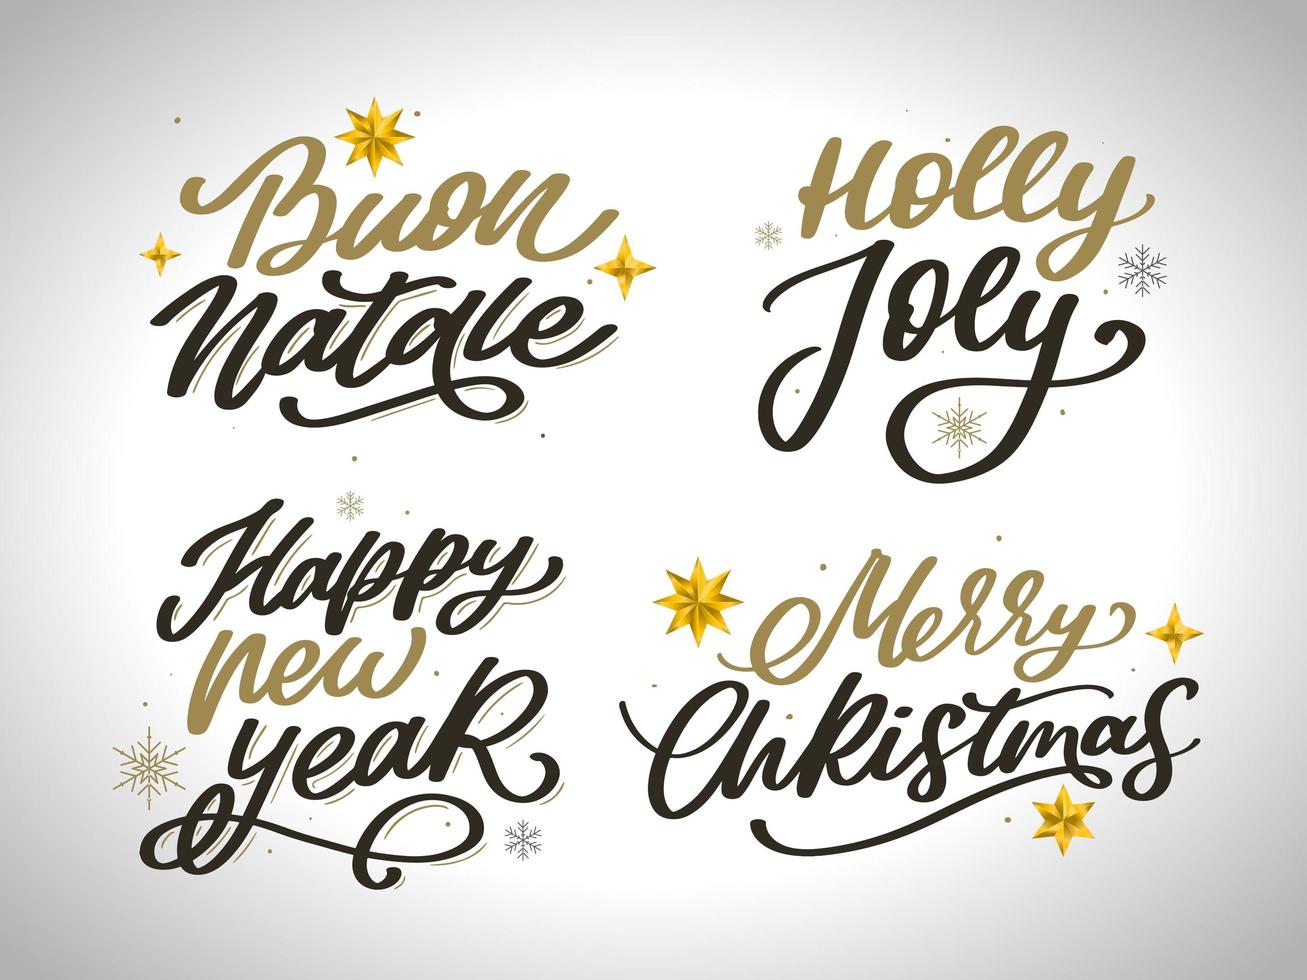 Merry Christmas New Year 2022 Lettering Calligraphy Design Set. Vector illustration